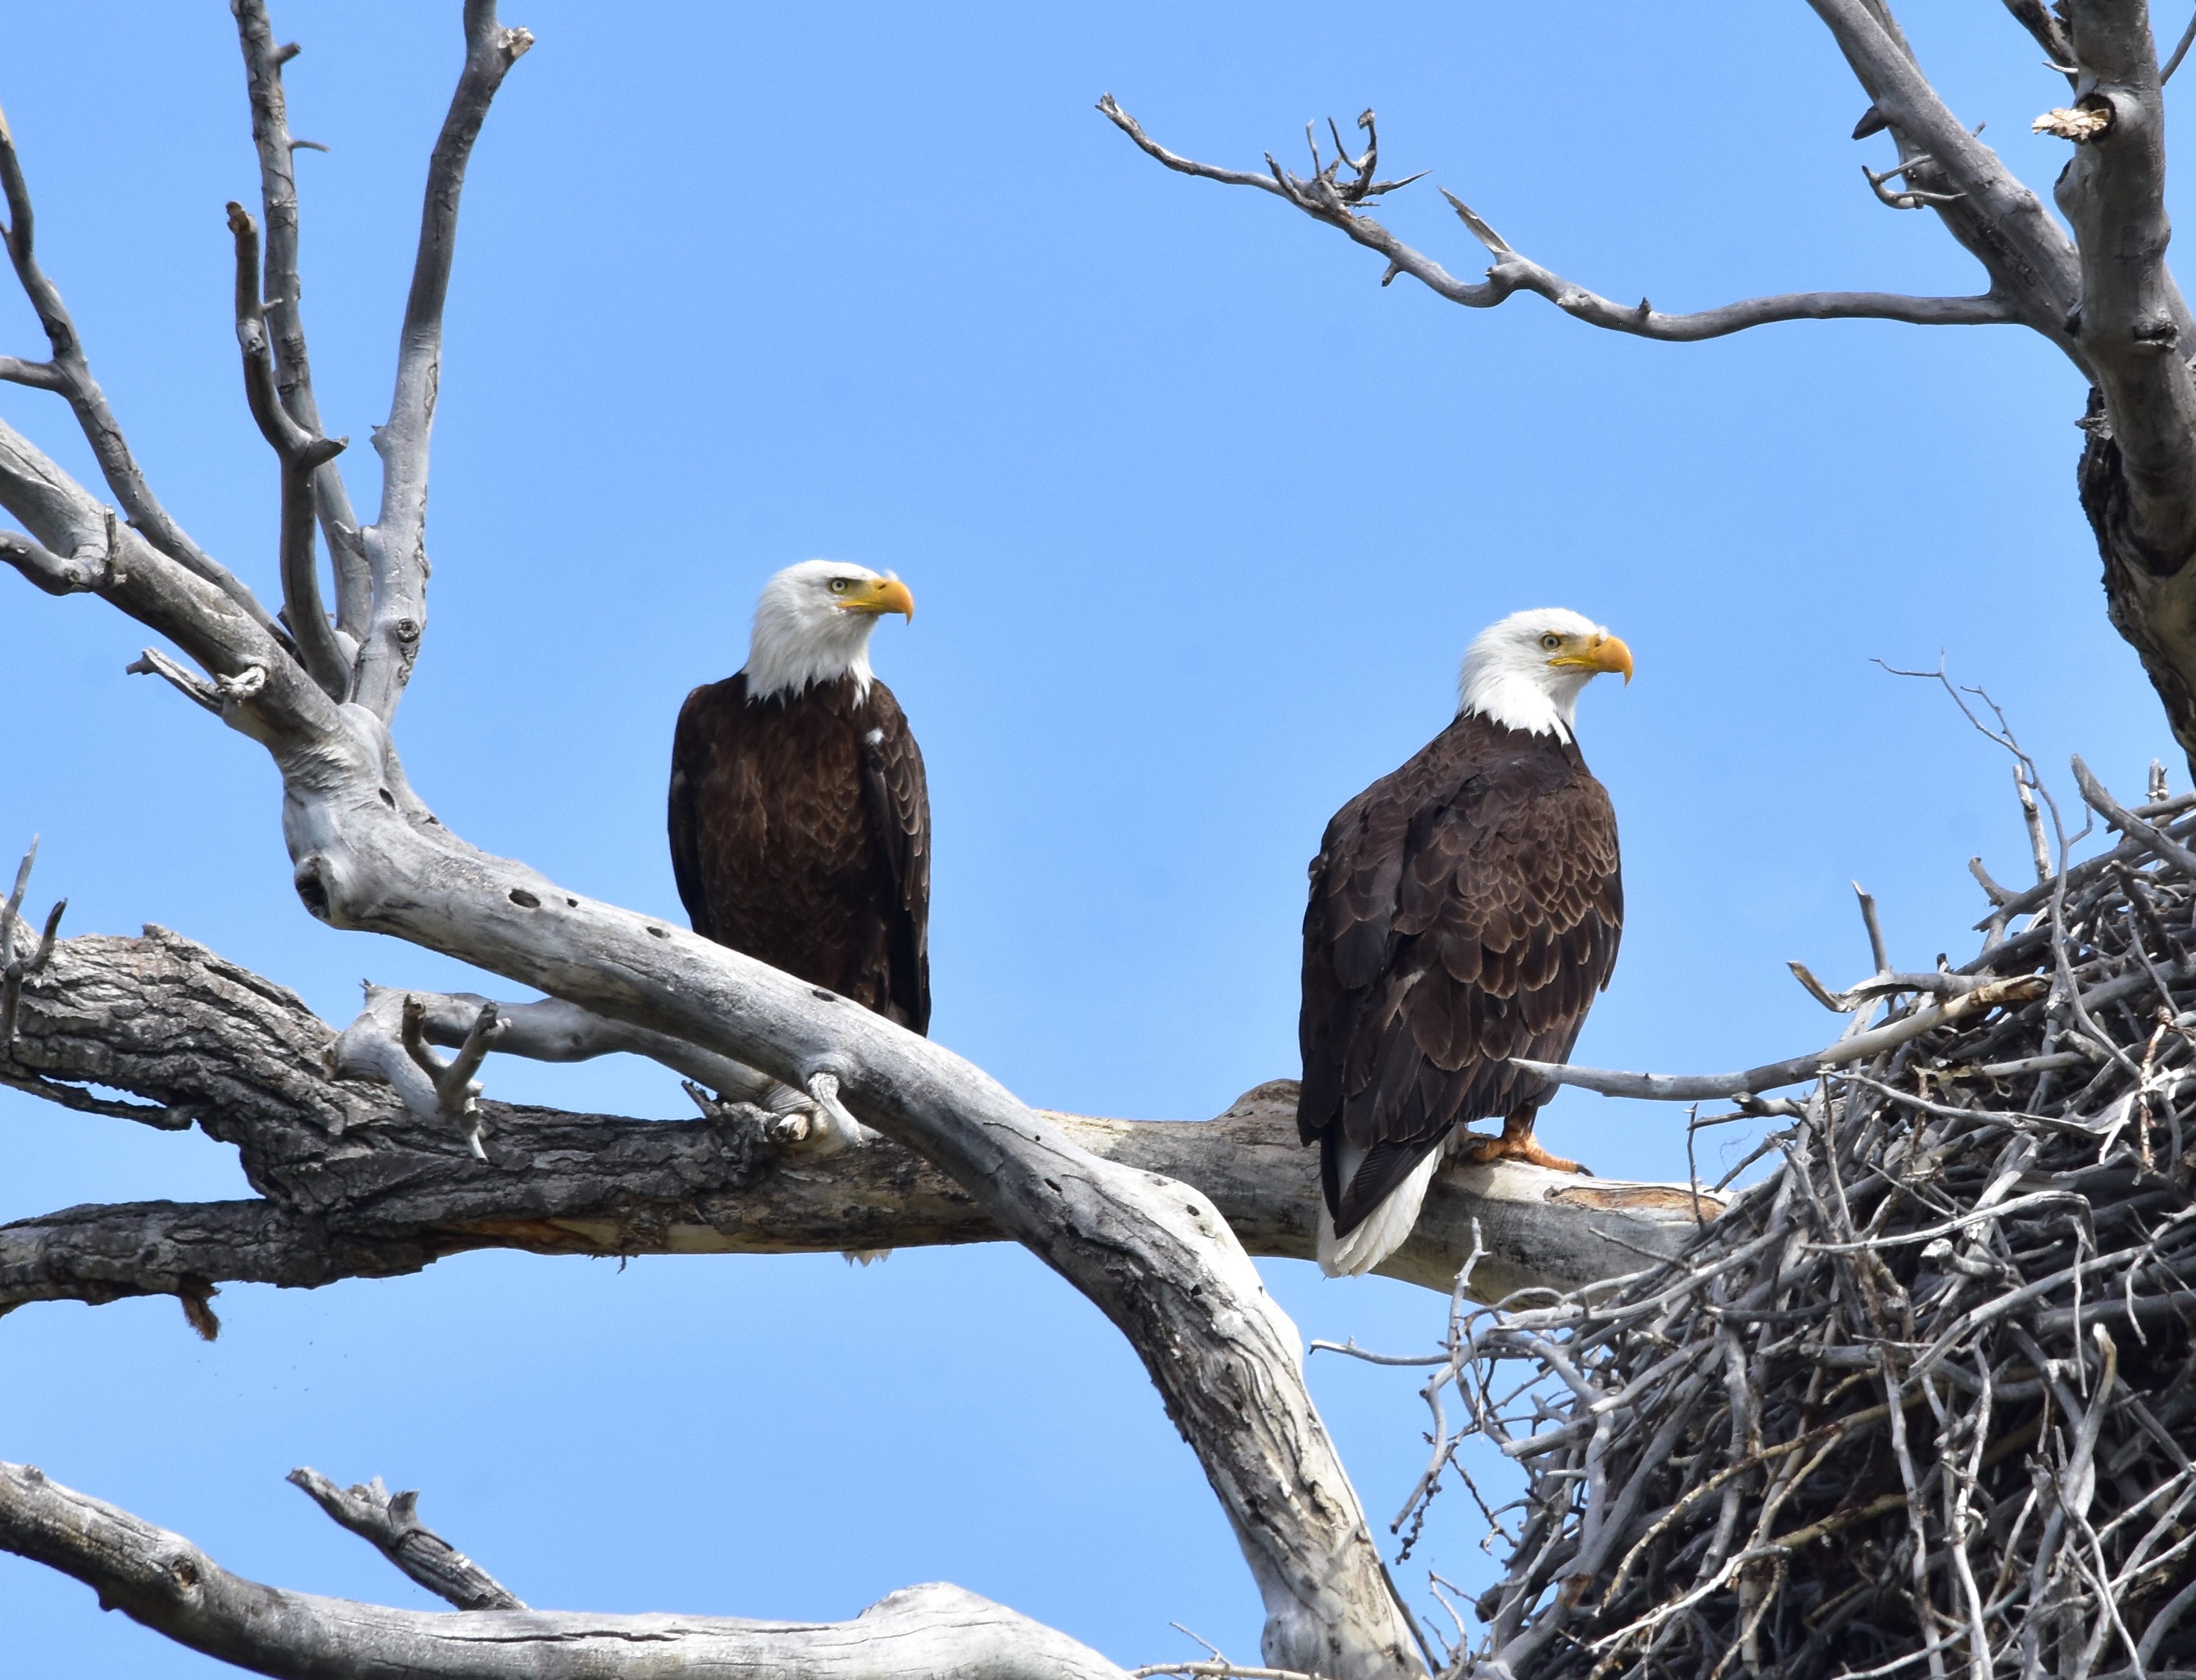 Two bald eagles perched along a nest